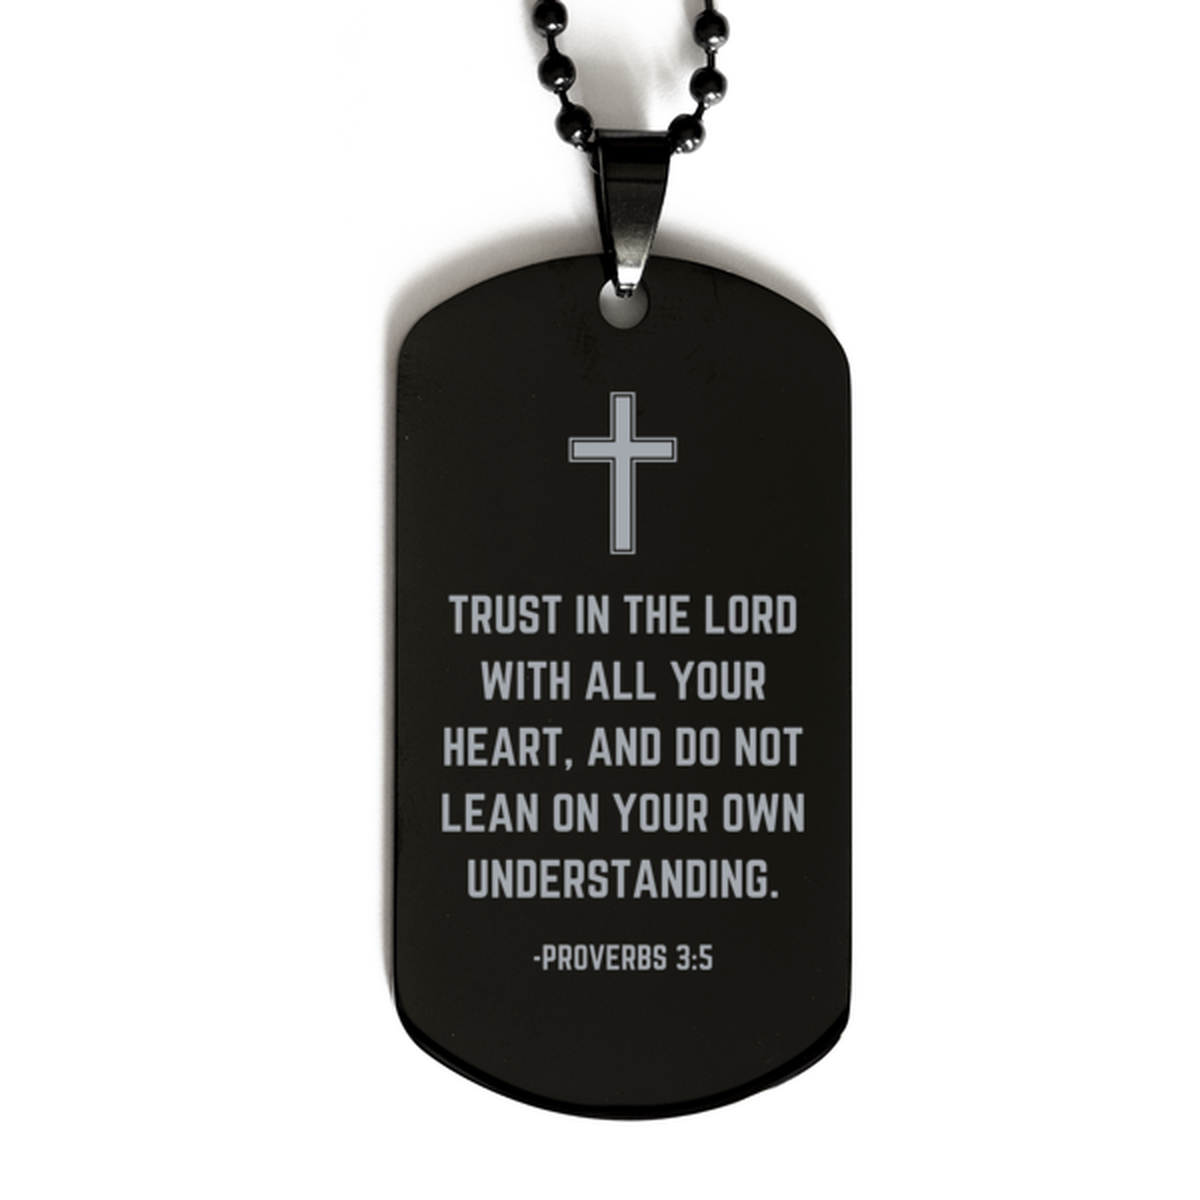 Baptism Gifts For Teenage Boys Girls, Christian Bible Verse Black Dog Tag, Trust in the Lord with all your heart, Confirmation Gifts, Bible Verse Necklace for Son, Godson, Grandson, Nephew